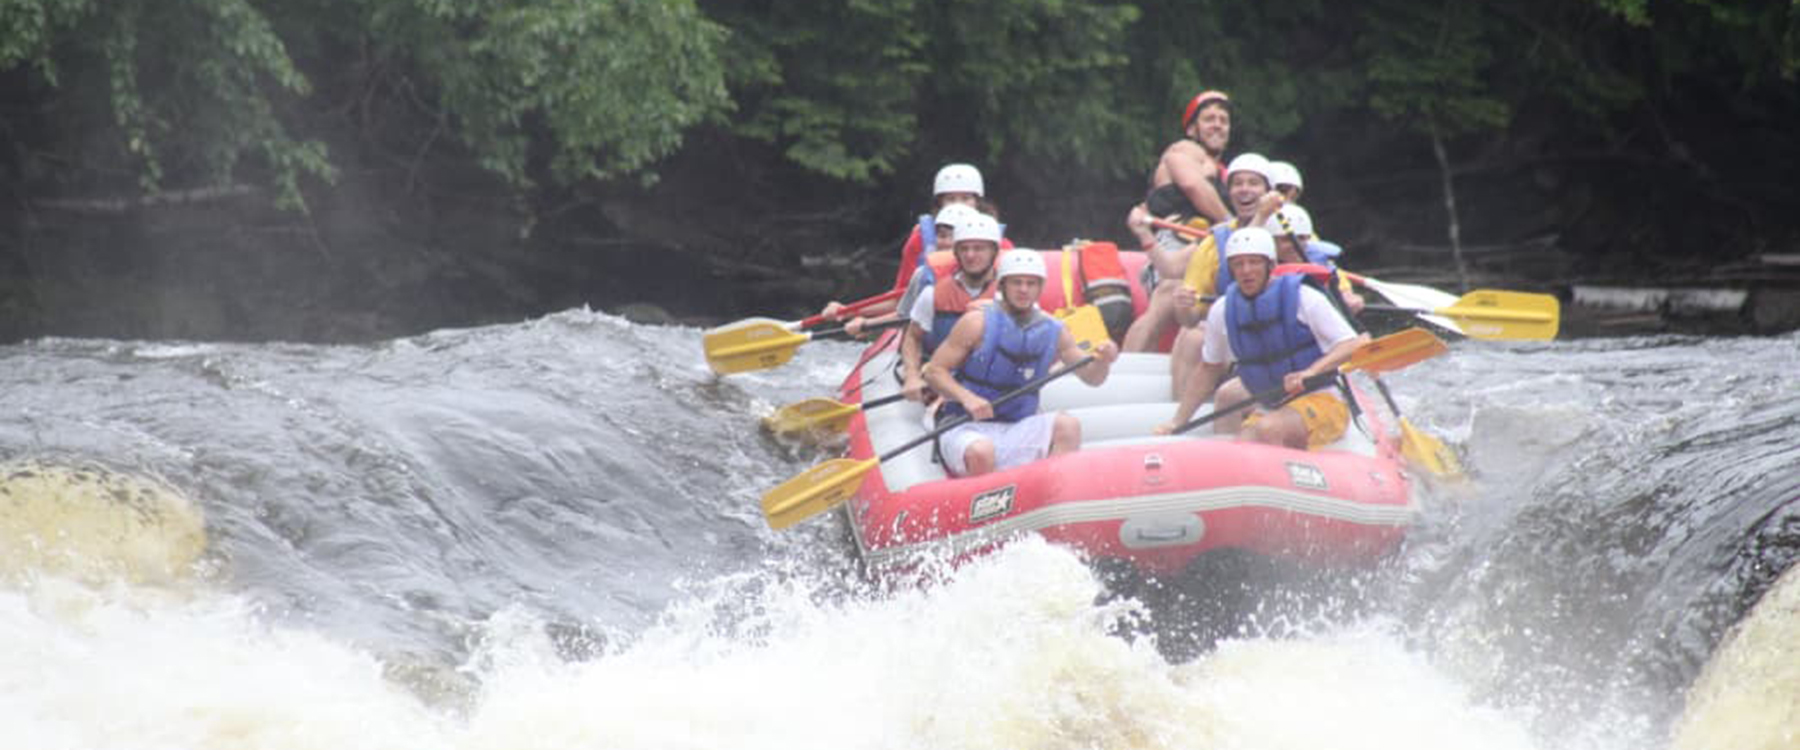 whitewater rafting in the midwest